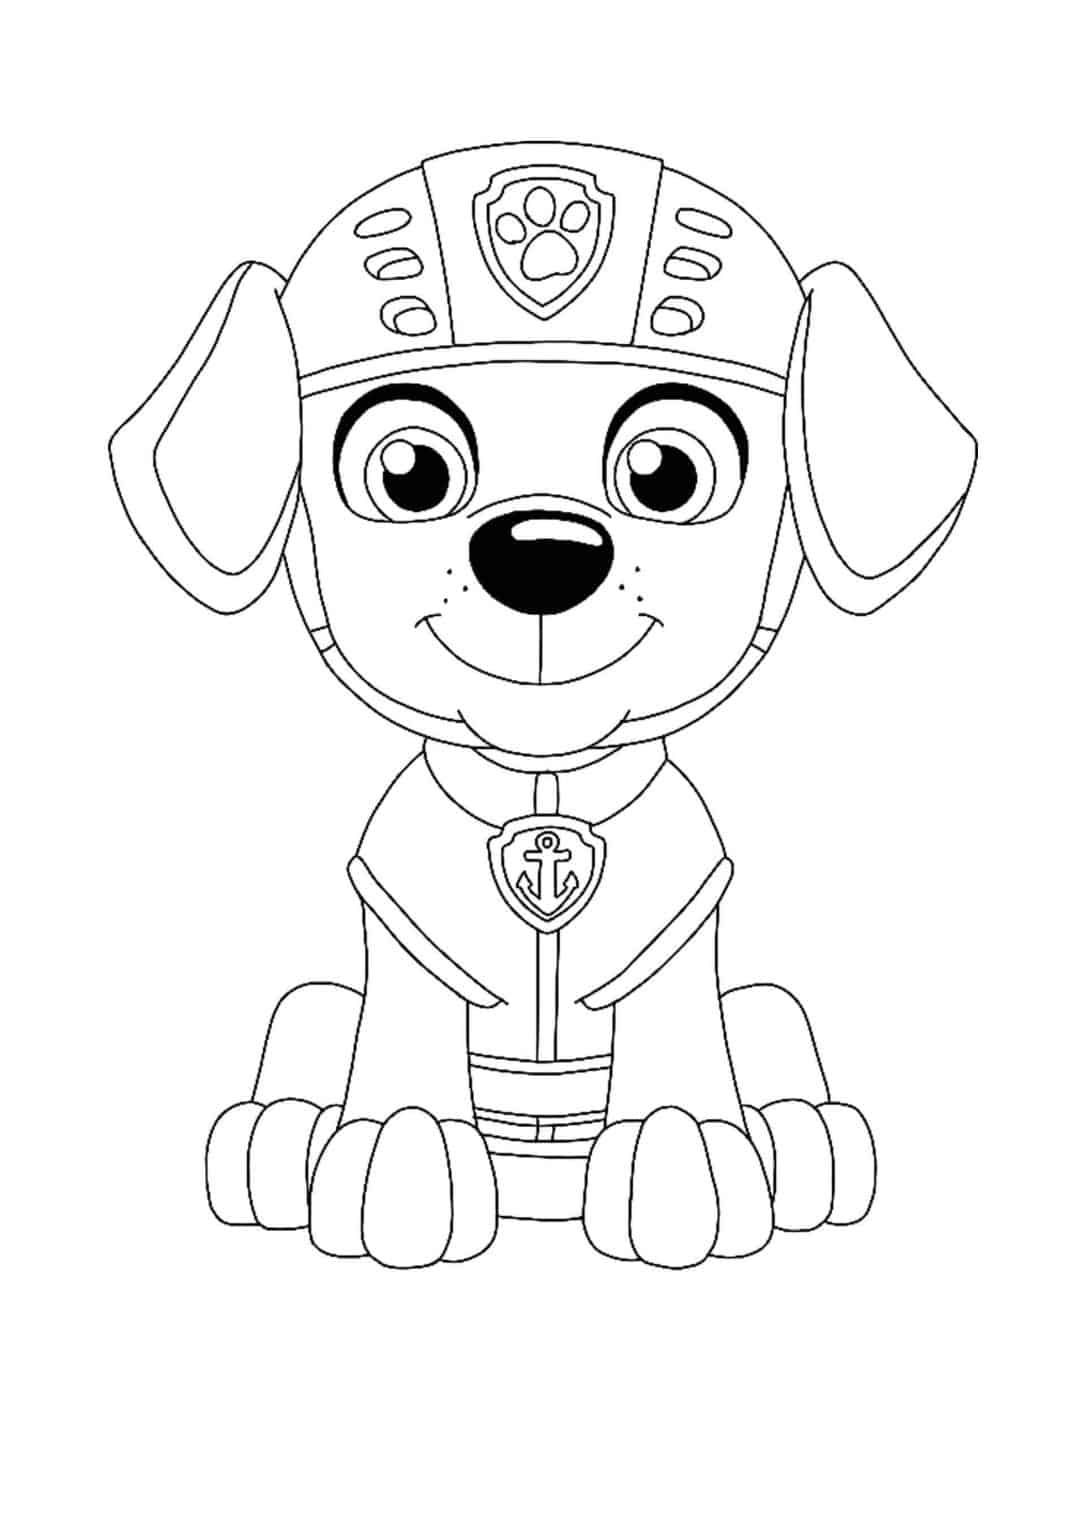 Paw Patrol Zuma Coloring Pages - 4 Free Printable Coloring Sheets | 2020 | Paw  patrol coloring, Paw patrol coloring pages, Zuma paw patrol